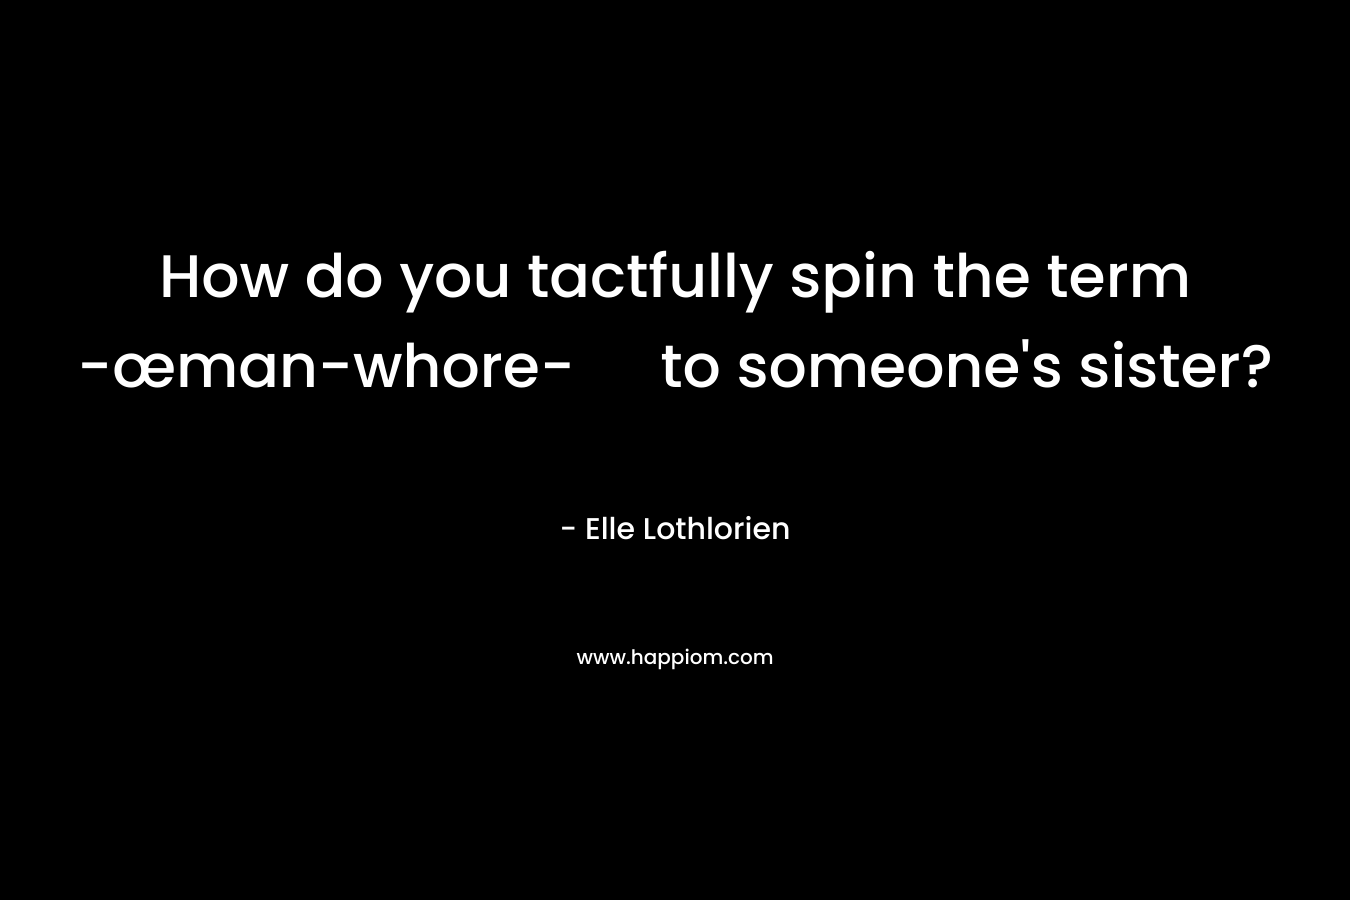 How do you tactfully spin the term -œman-whore- to someone’s sister? – Elle Lothlorien